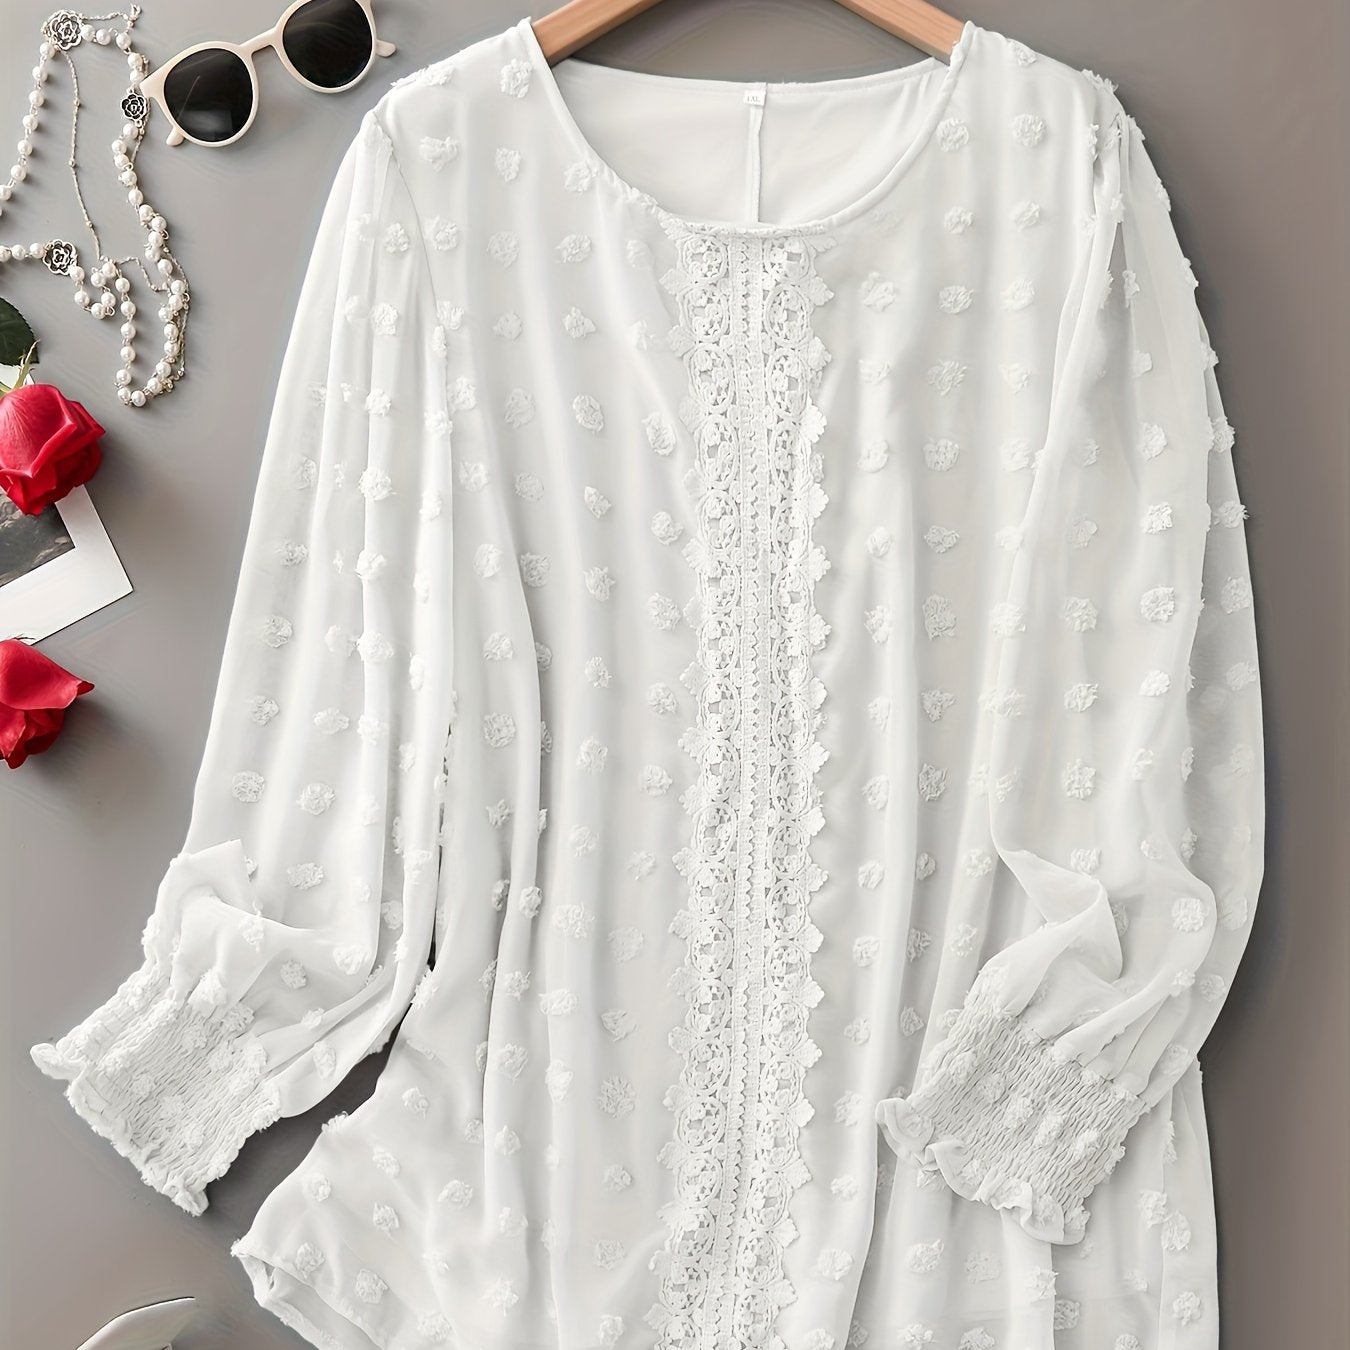 Flattering Plus Size Lace Blouse with Pompom Trim - Delicate Crew Neck Long Sleeve Top for Stylish Spring Days - Womens Fashion Plus Size Clothing